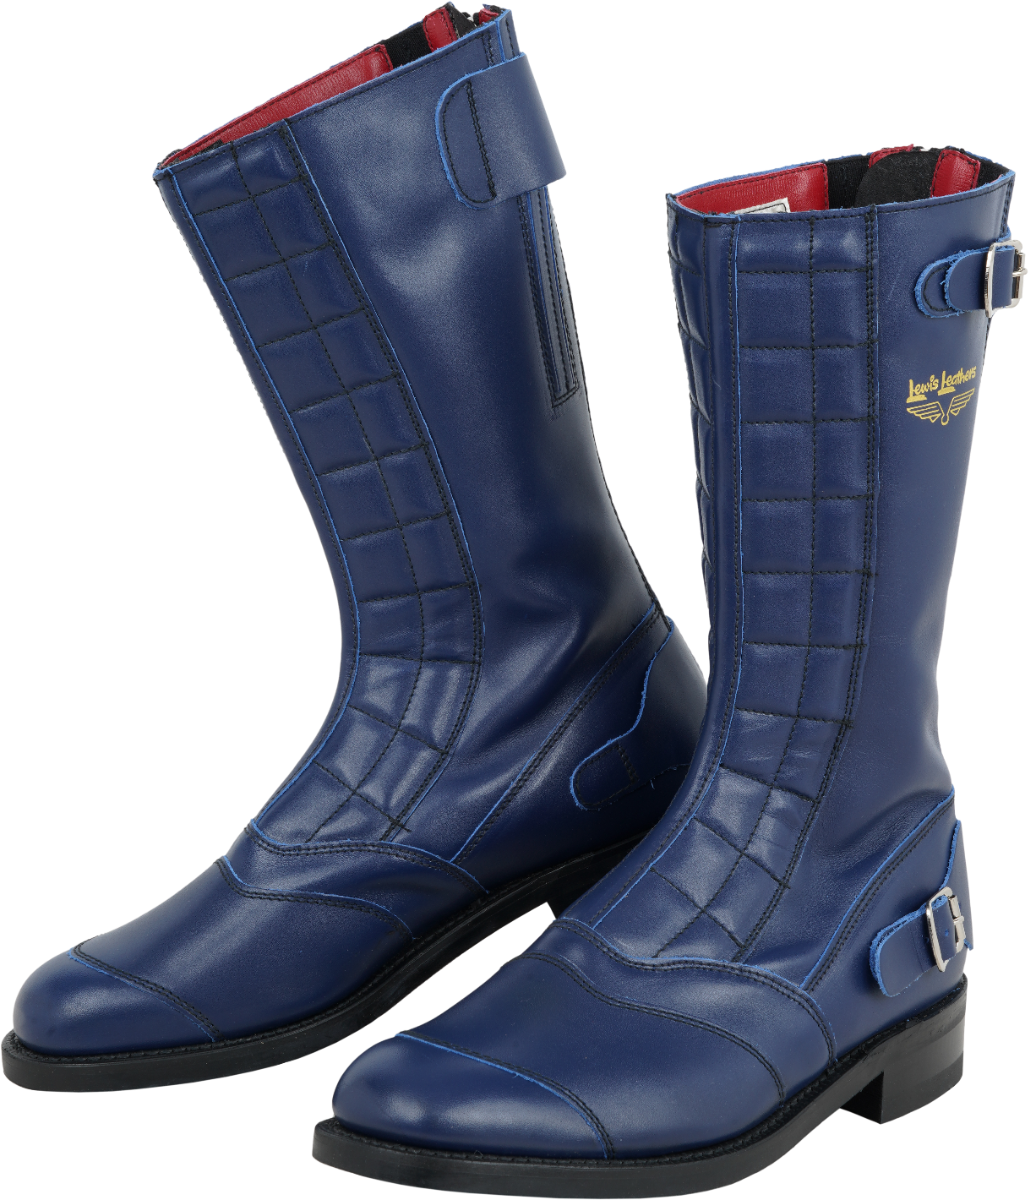 Road Racer Boots No.177 Navy - Lewis Leathers Japan